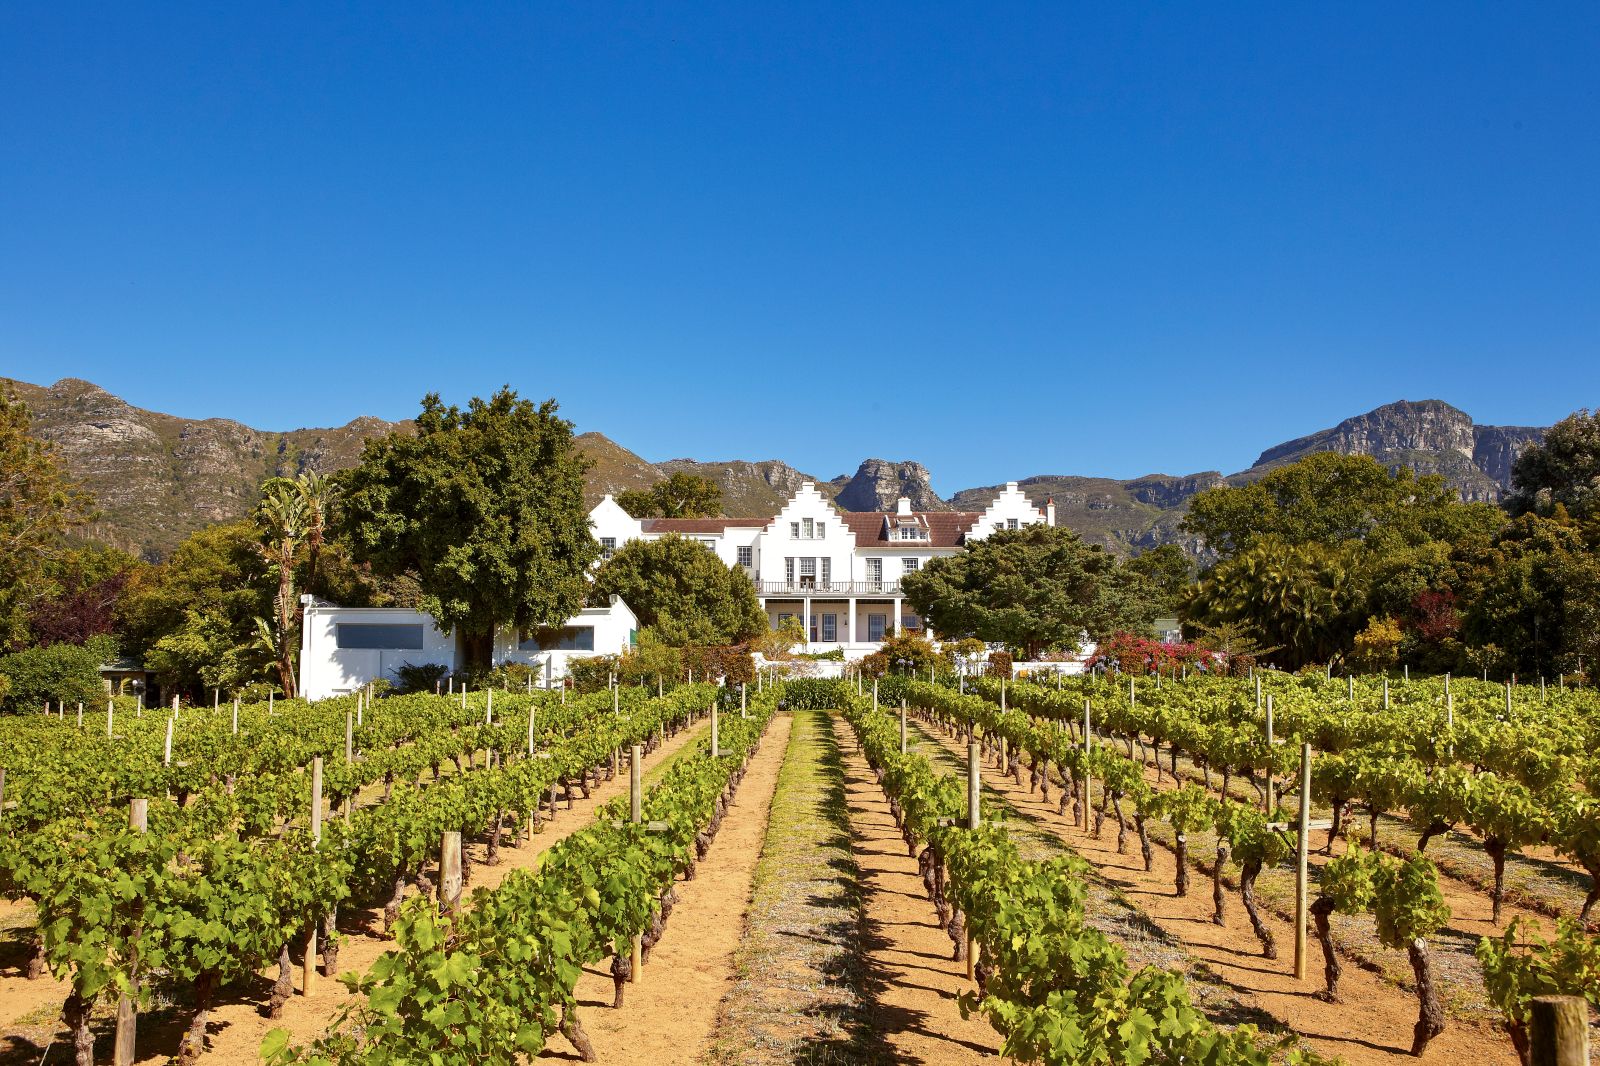 Grounds and vineyards of The Cellars Hohenort in South Africa